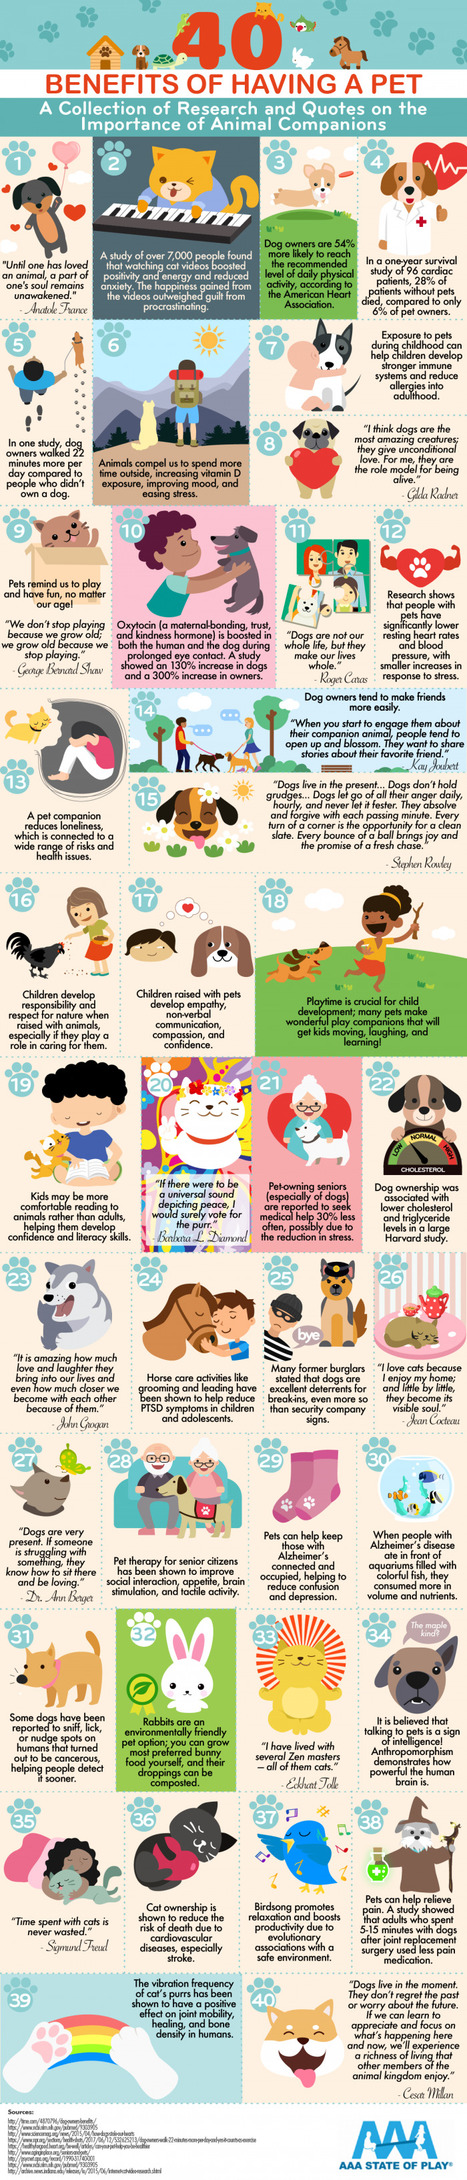 40 Benefits Of Owning Pets - Infographic | Digital Delights - Digital Tribes | Scoop.it